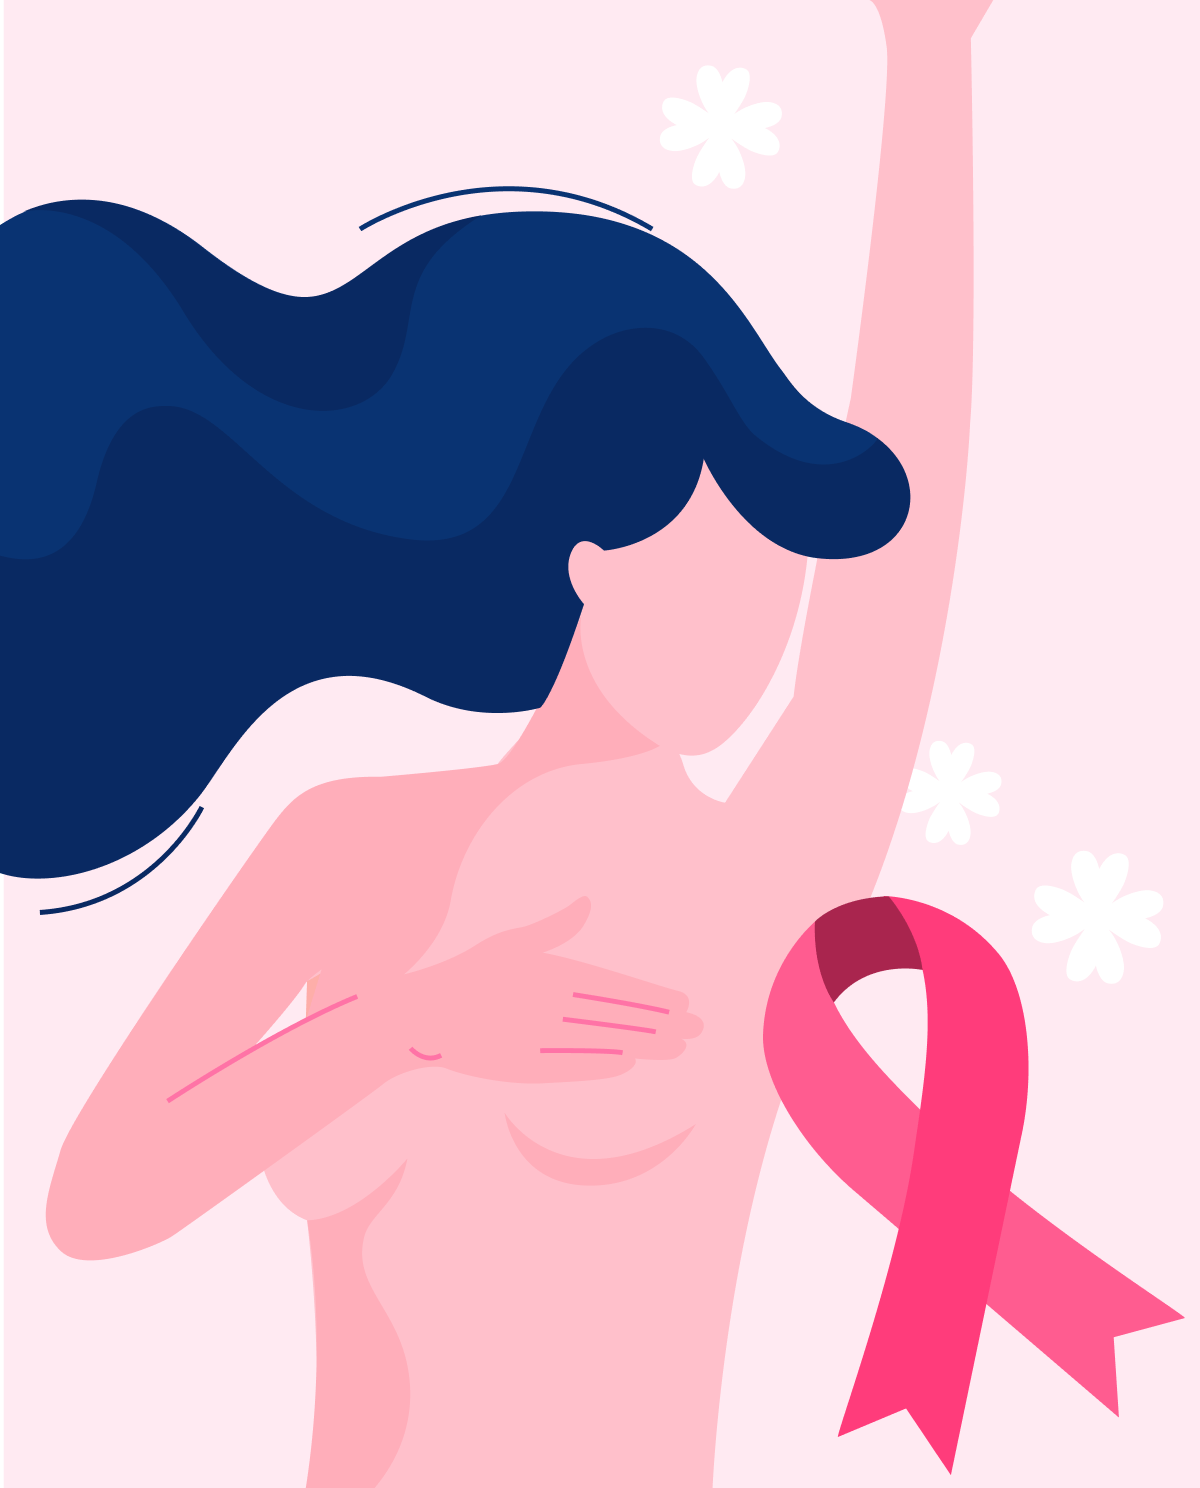 Breast cancer awareness: the importance of self-examination